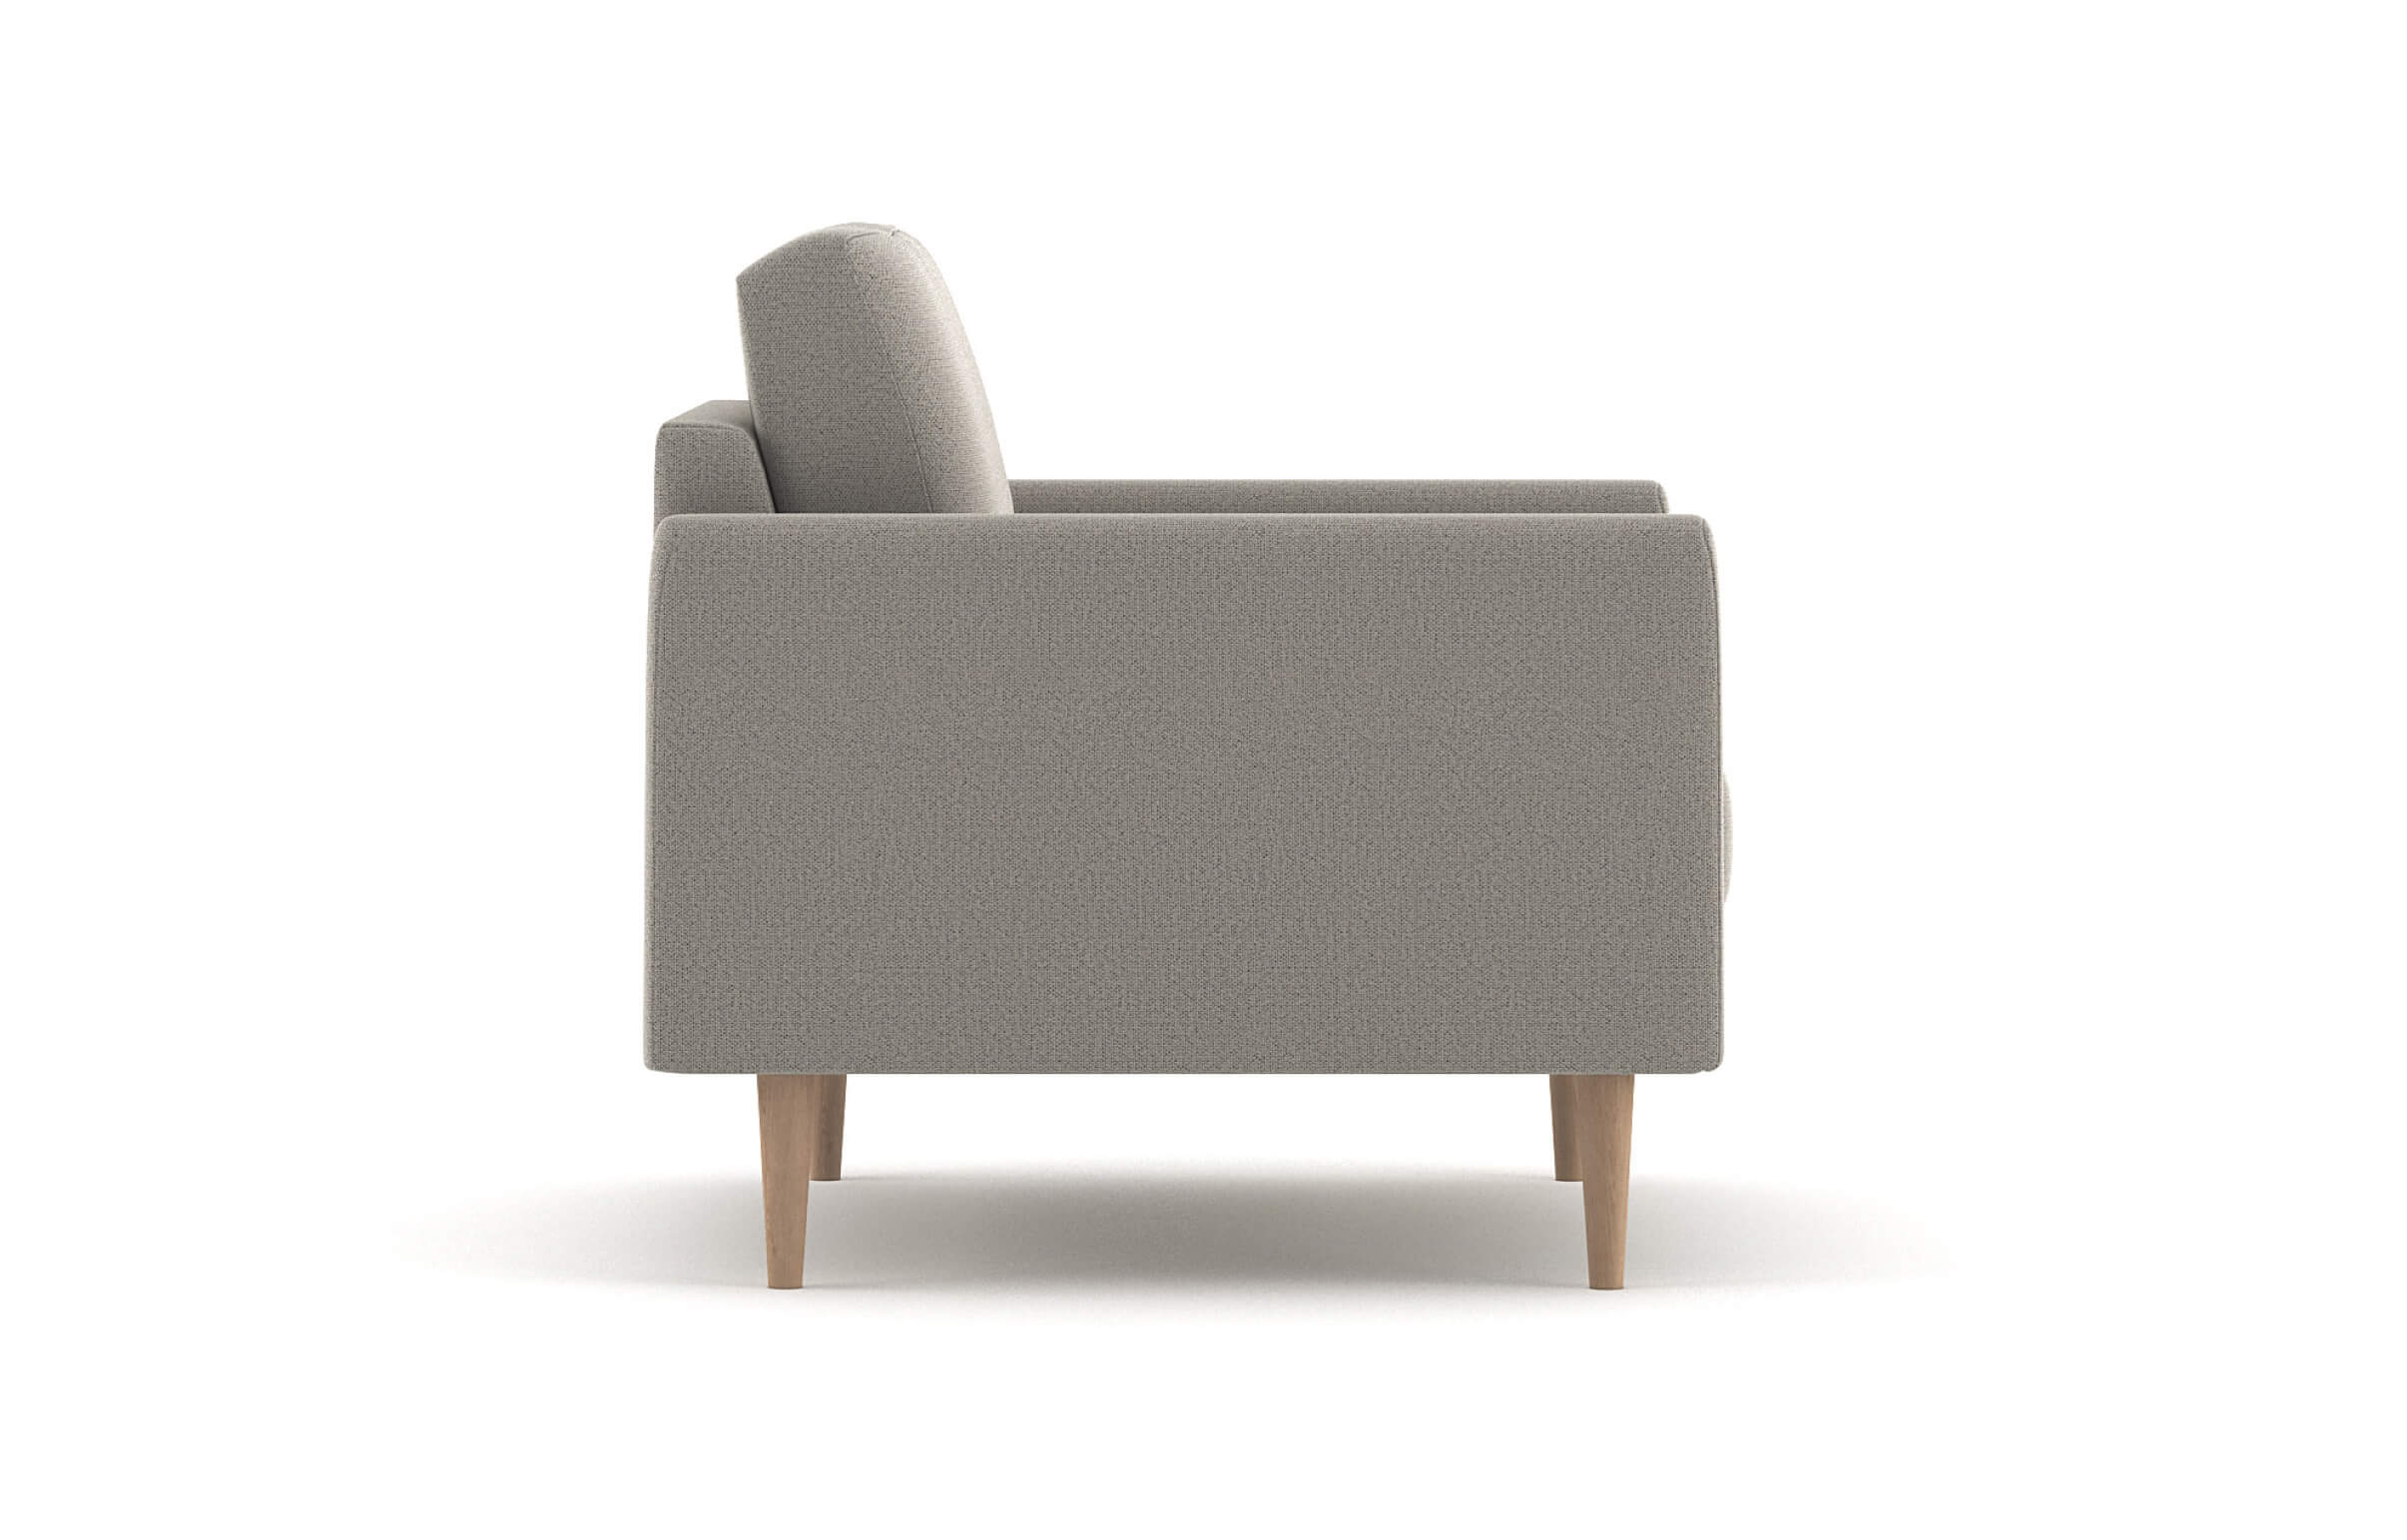 G: Shown in Texture Haze fabric with maple legs